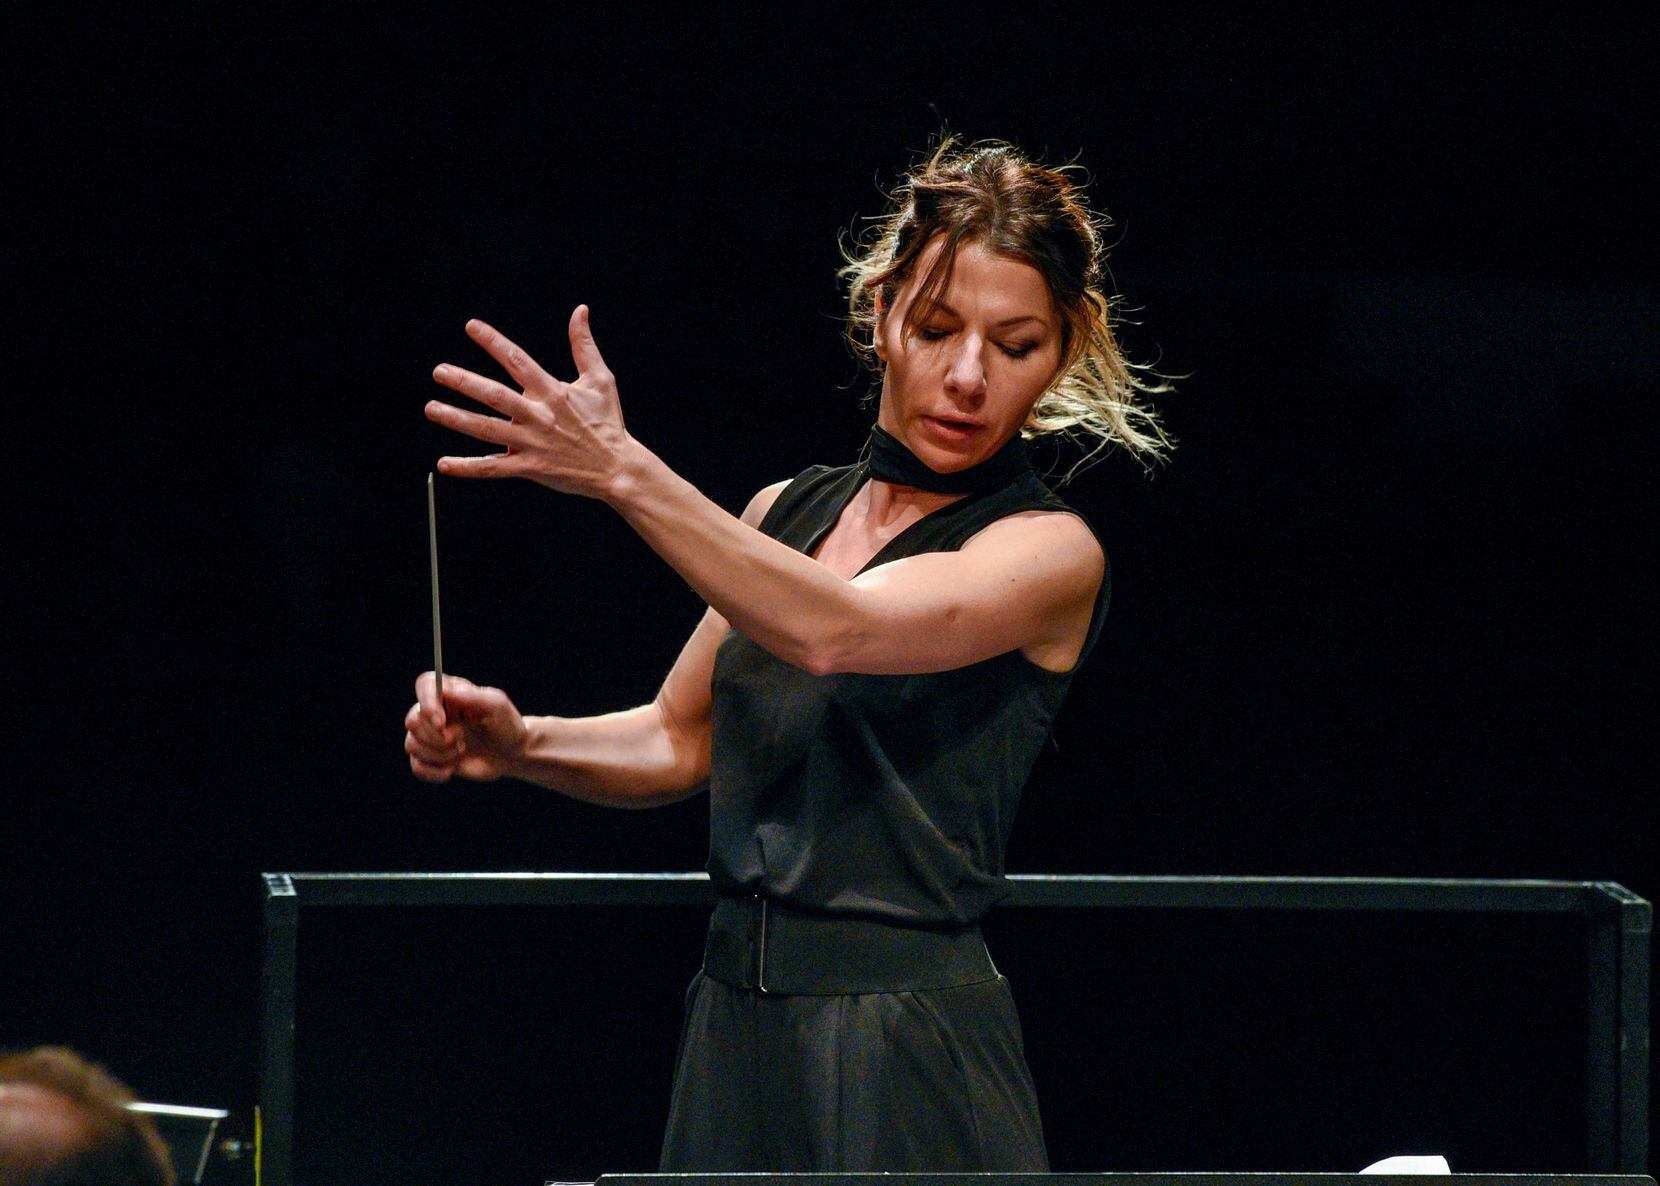 A blonde woman conductor holds a baton while conducting an orchestra.